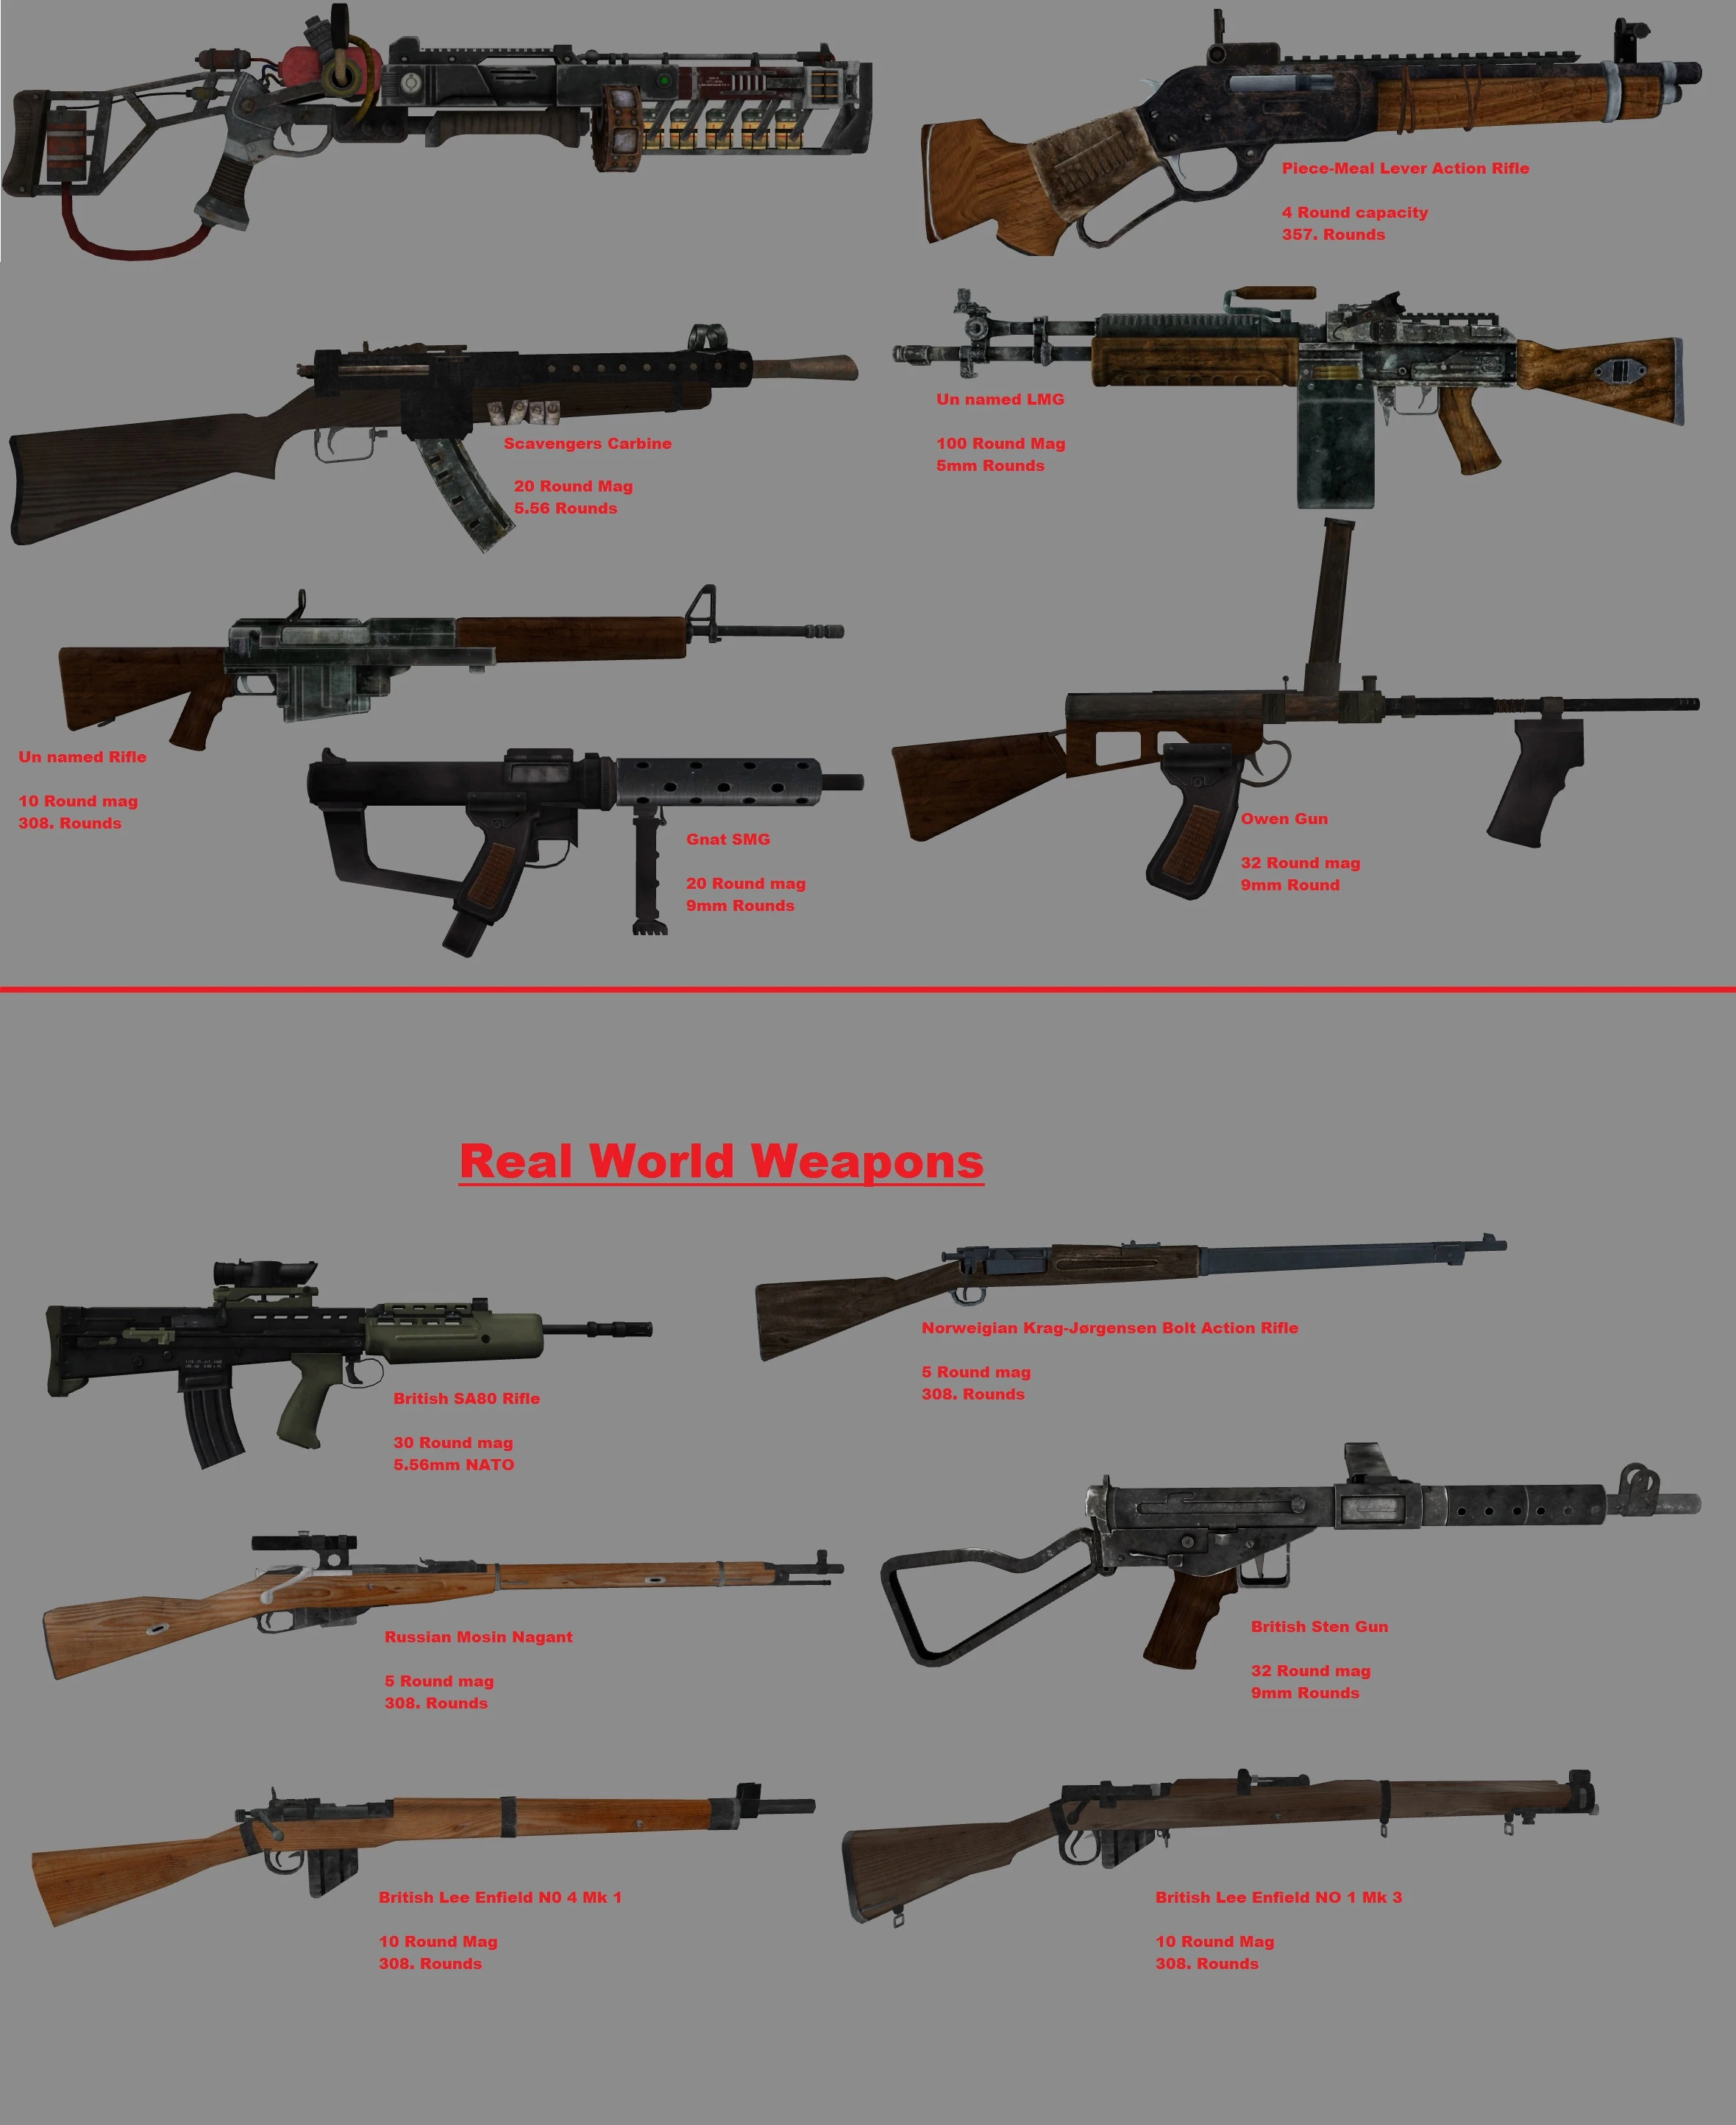 fallout 4 new vegas weapons